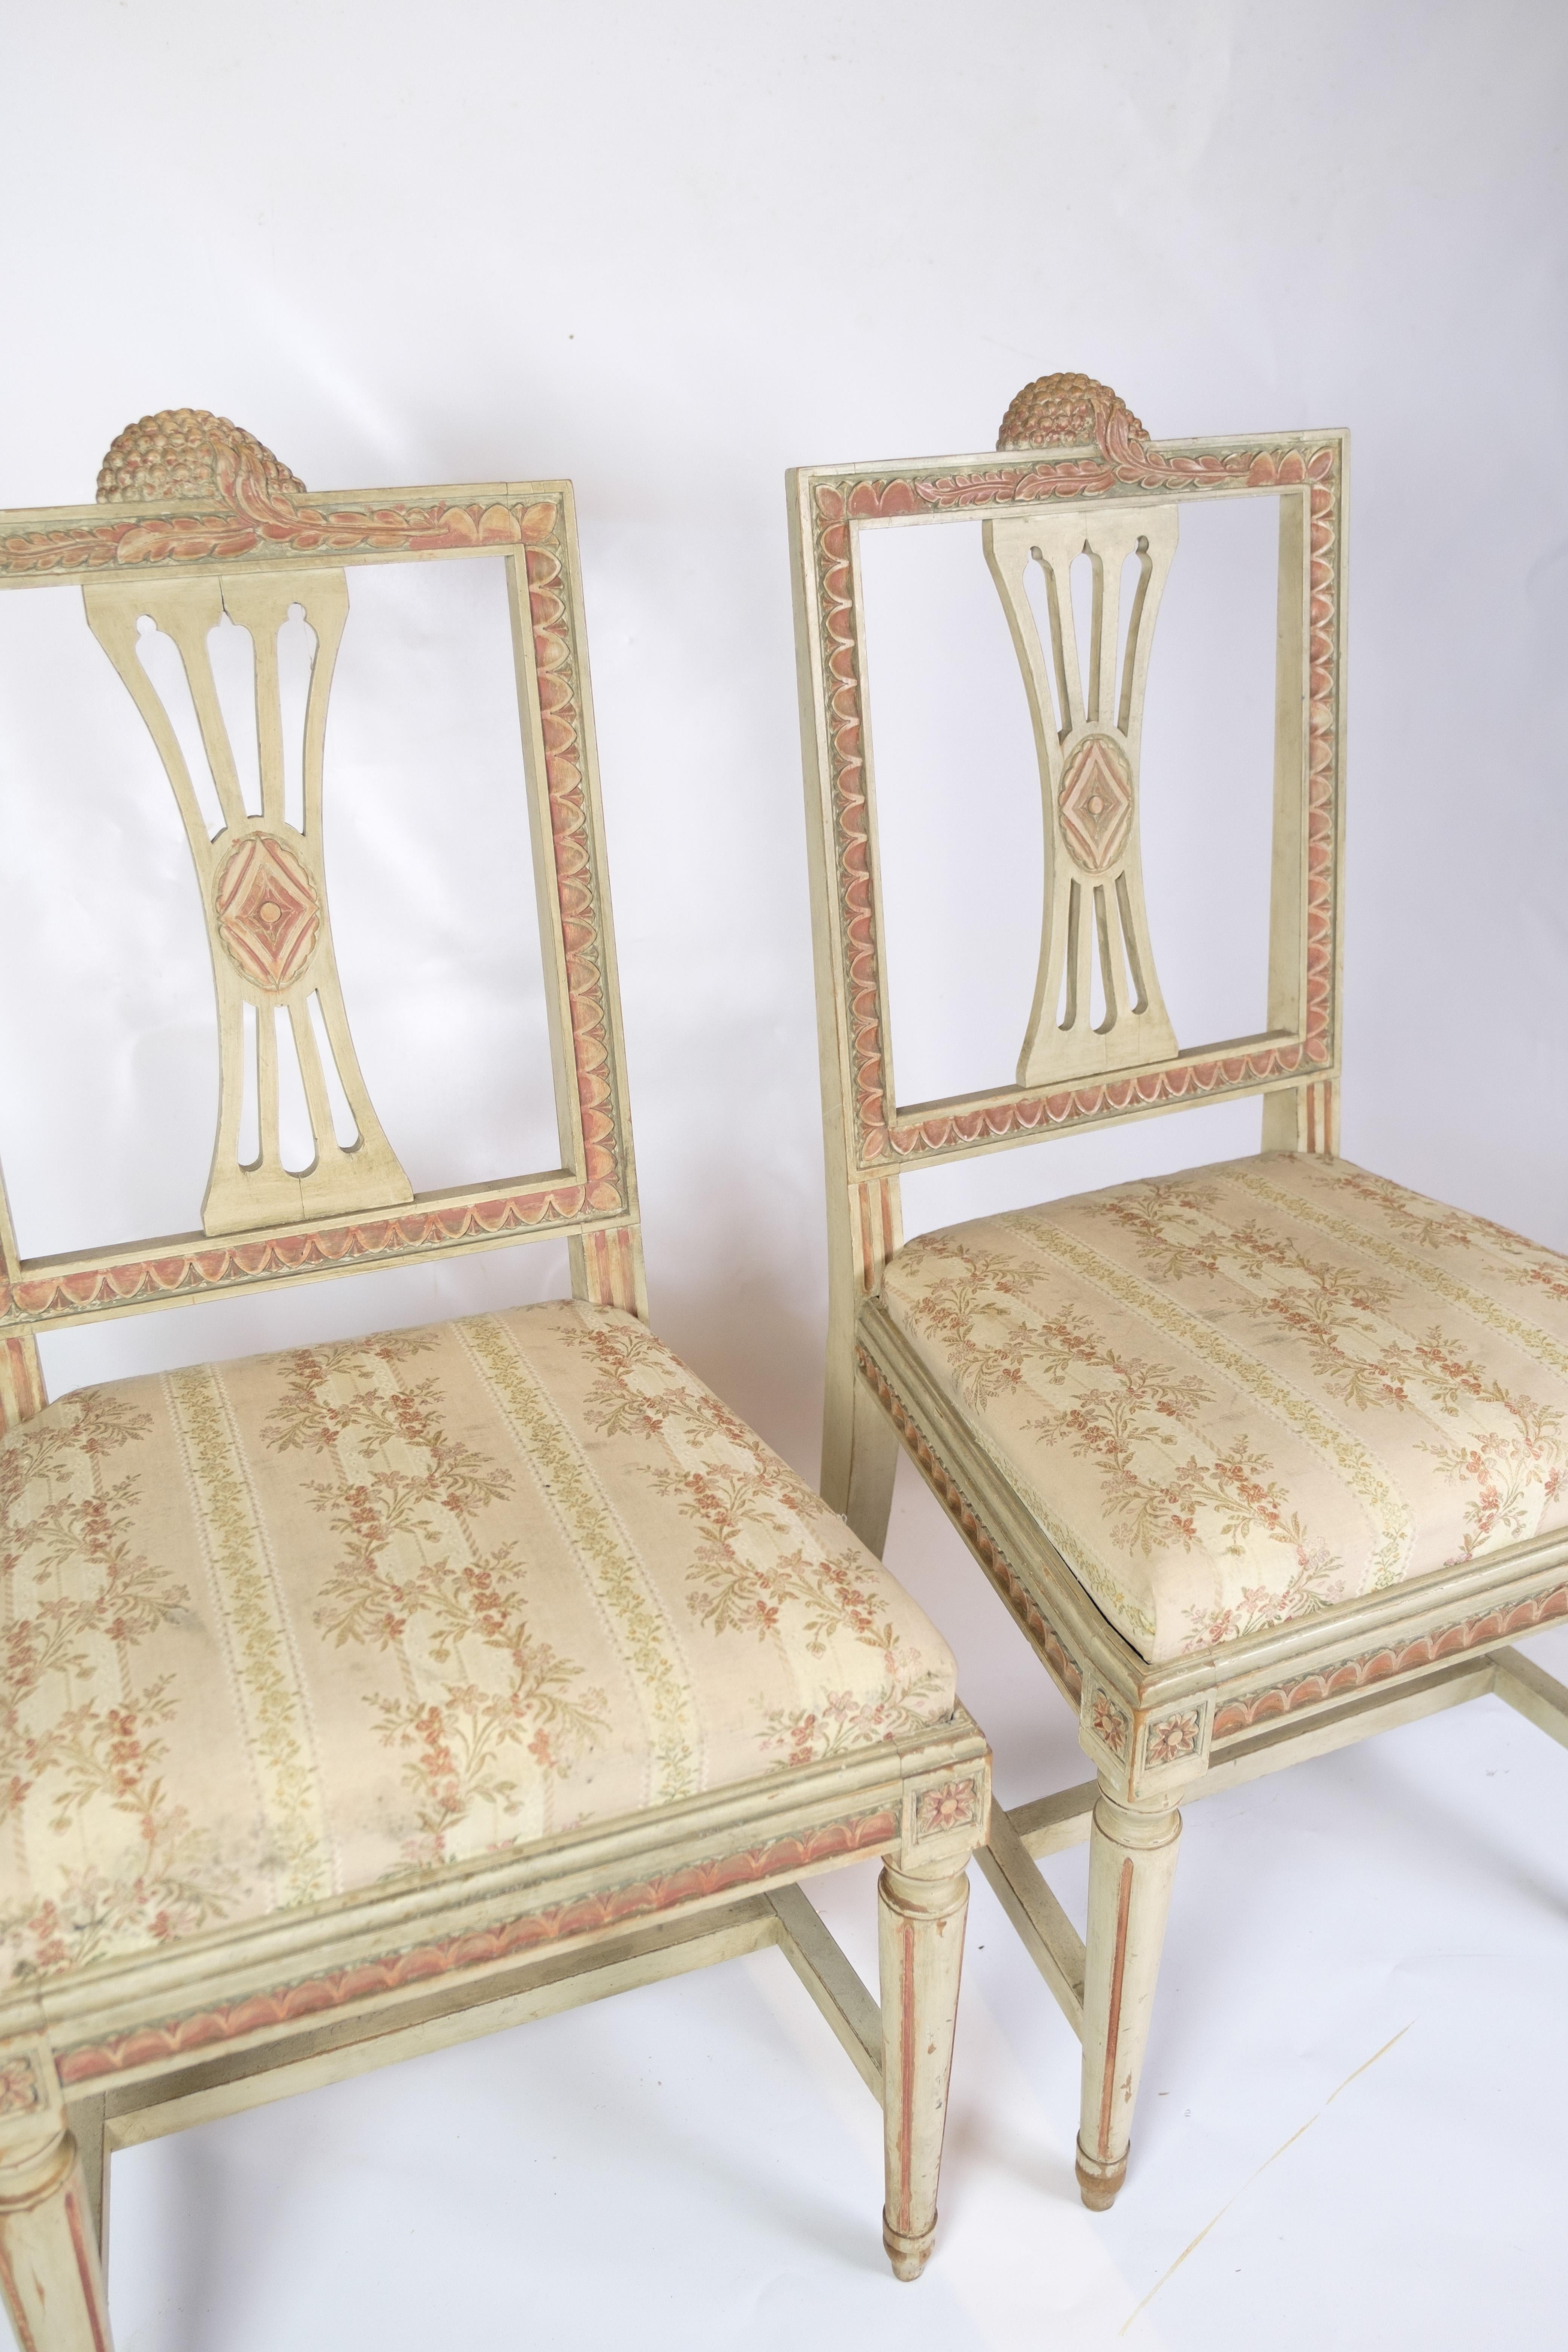 This set of two Gustavian style chairs from 1880 is a beautiful expression of early European furniture art and aesthetics. Inspired by the Swedish Gustavian period, these chairs are characterized by their elegant and refined design.

With their